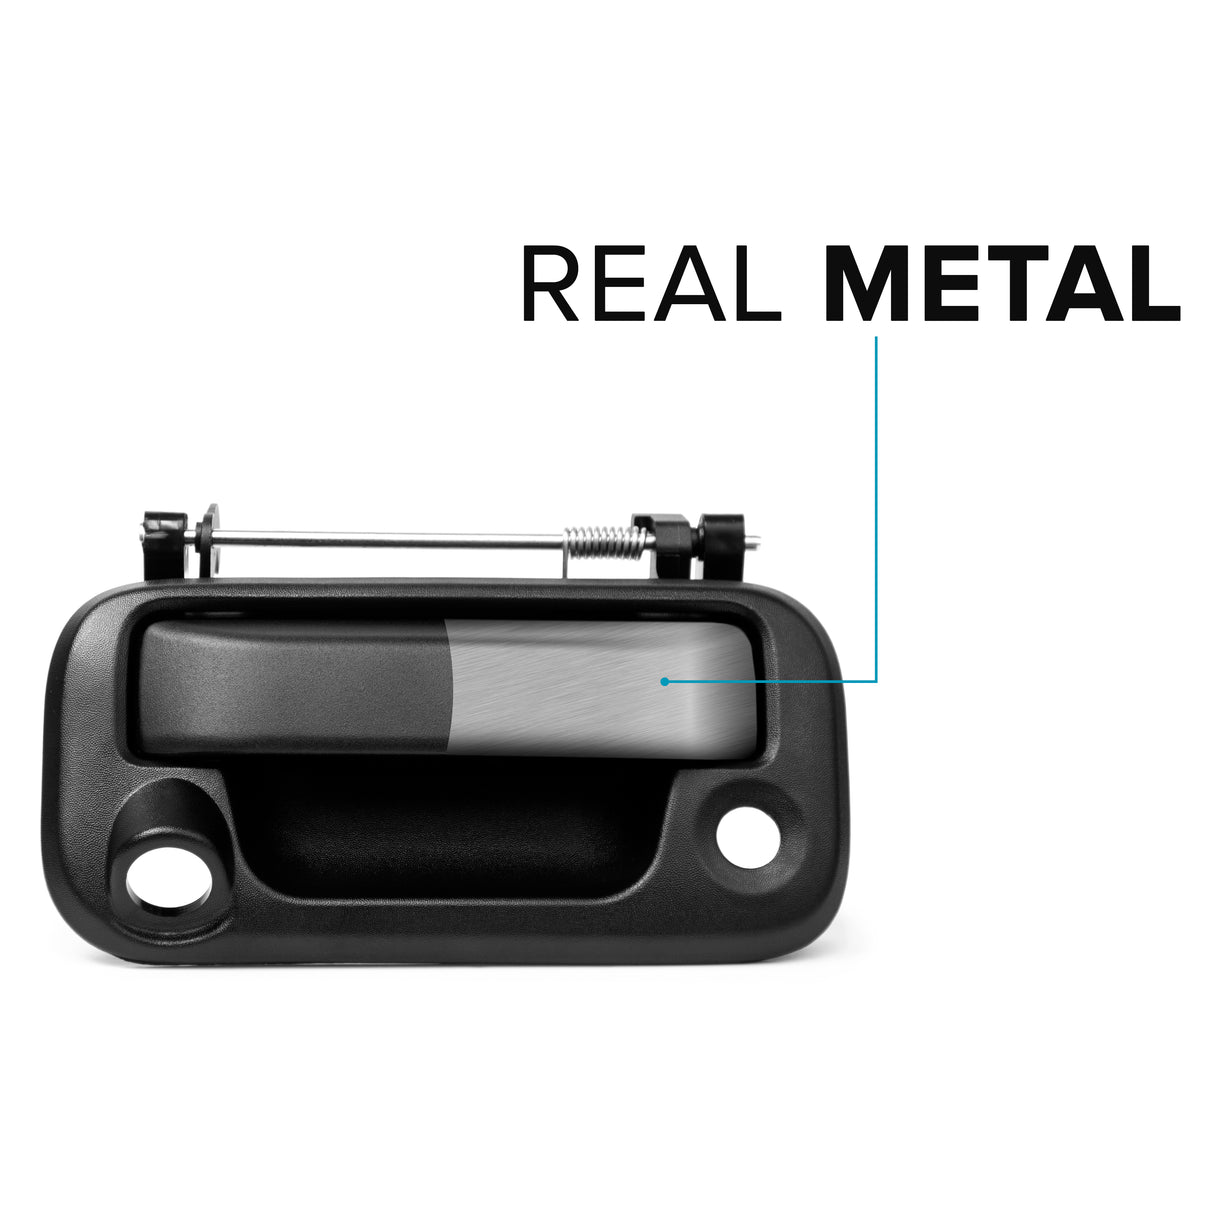 Ford F150, F250, F350, F450, F550 (2005-2016) Black Metal Replacement Tailgate Handle with Backup Camera